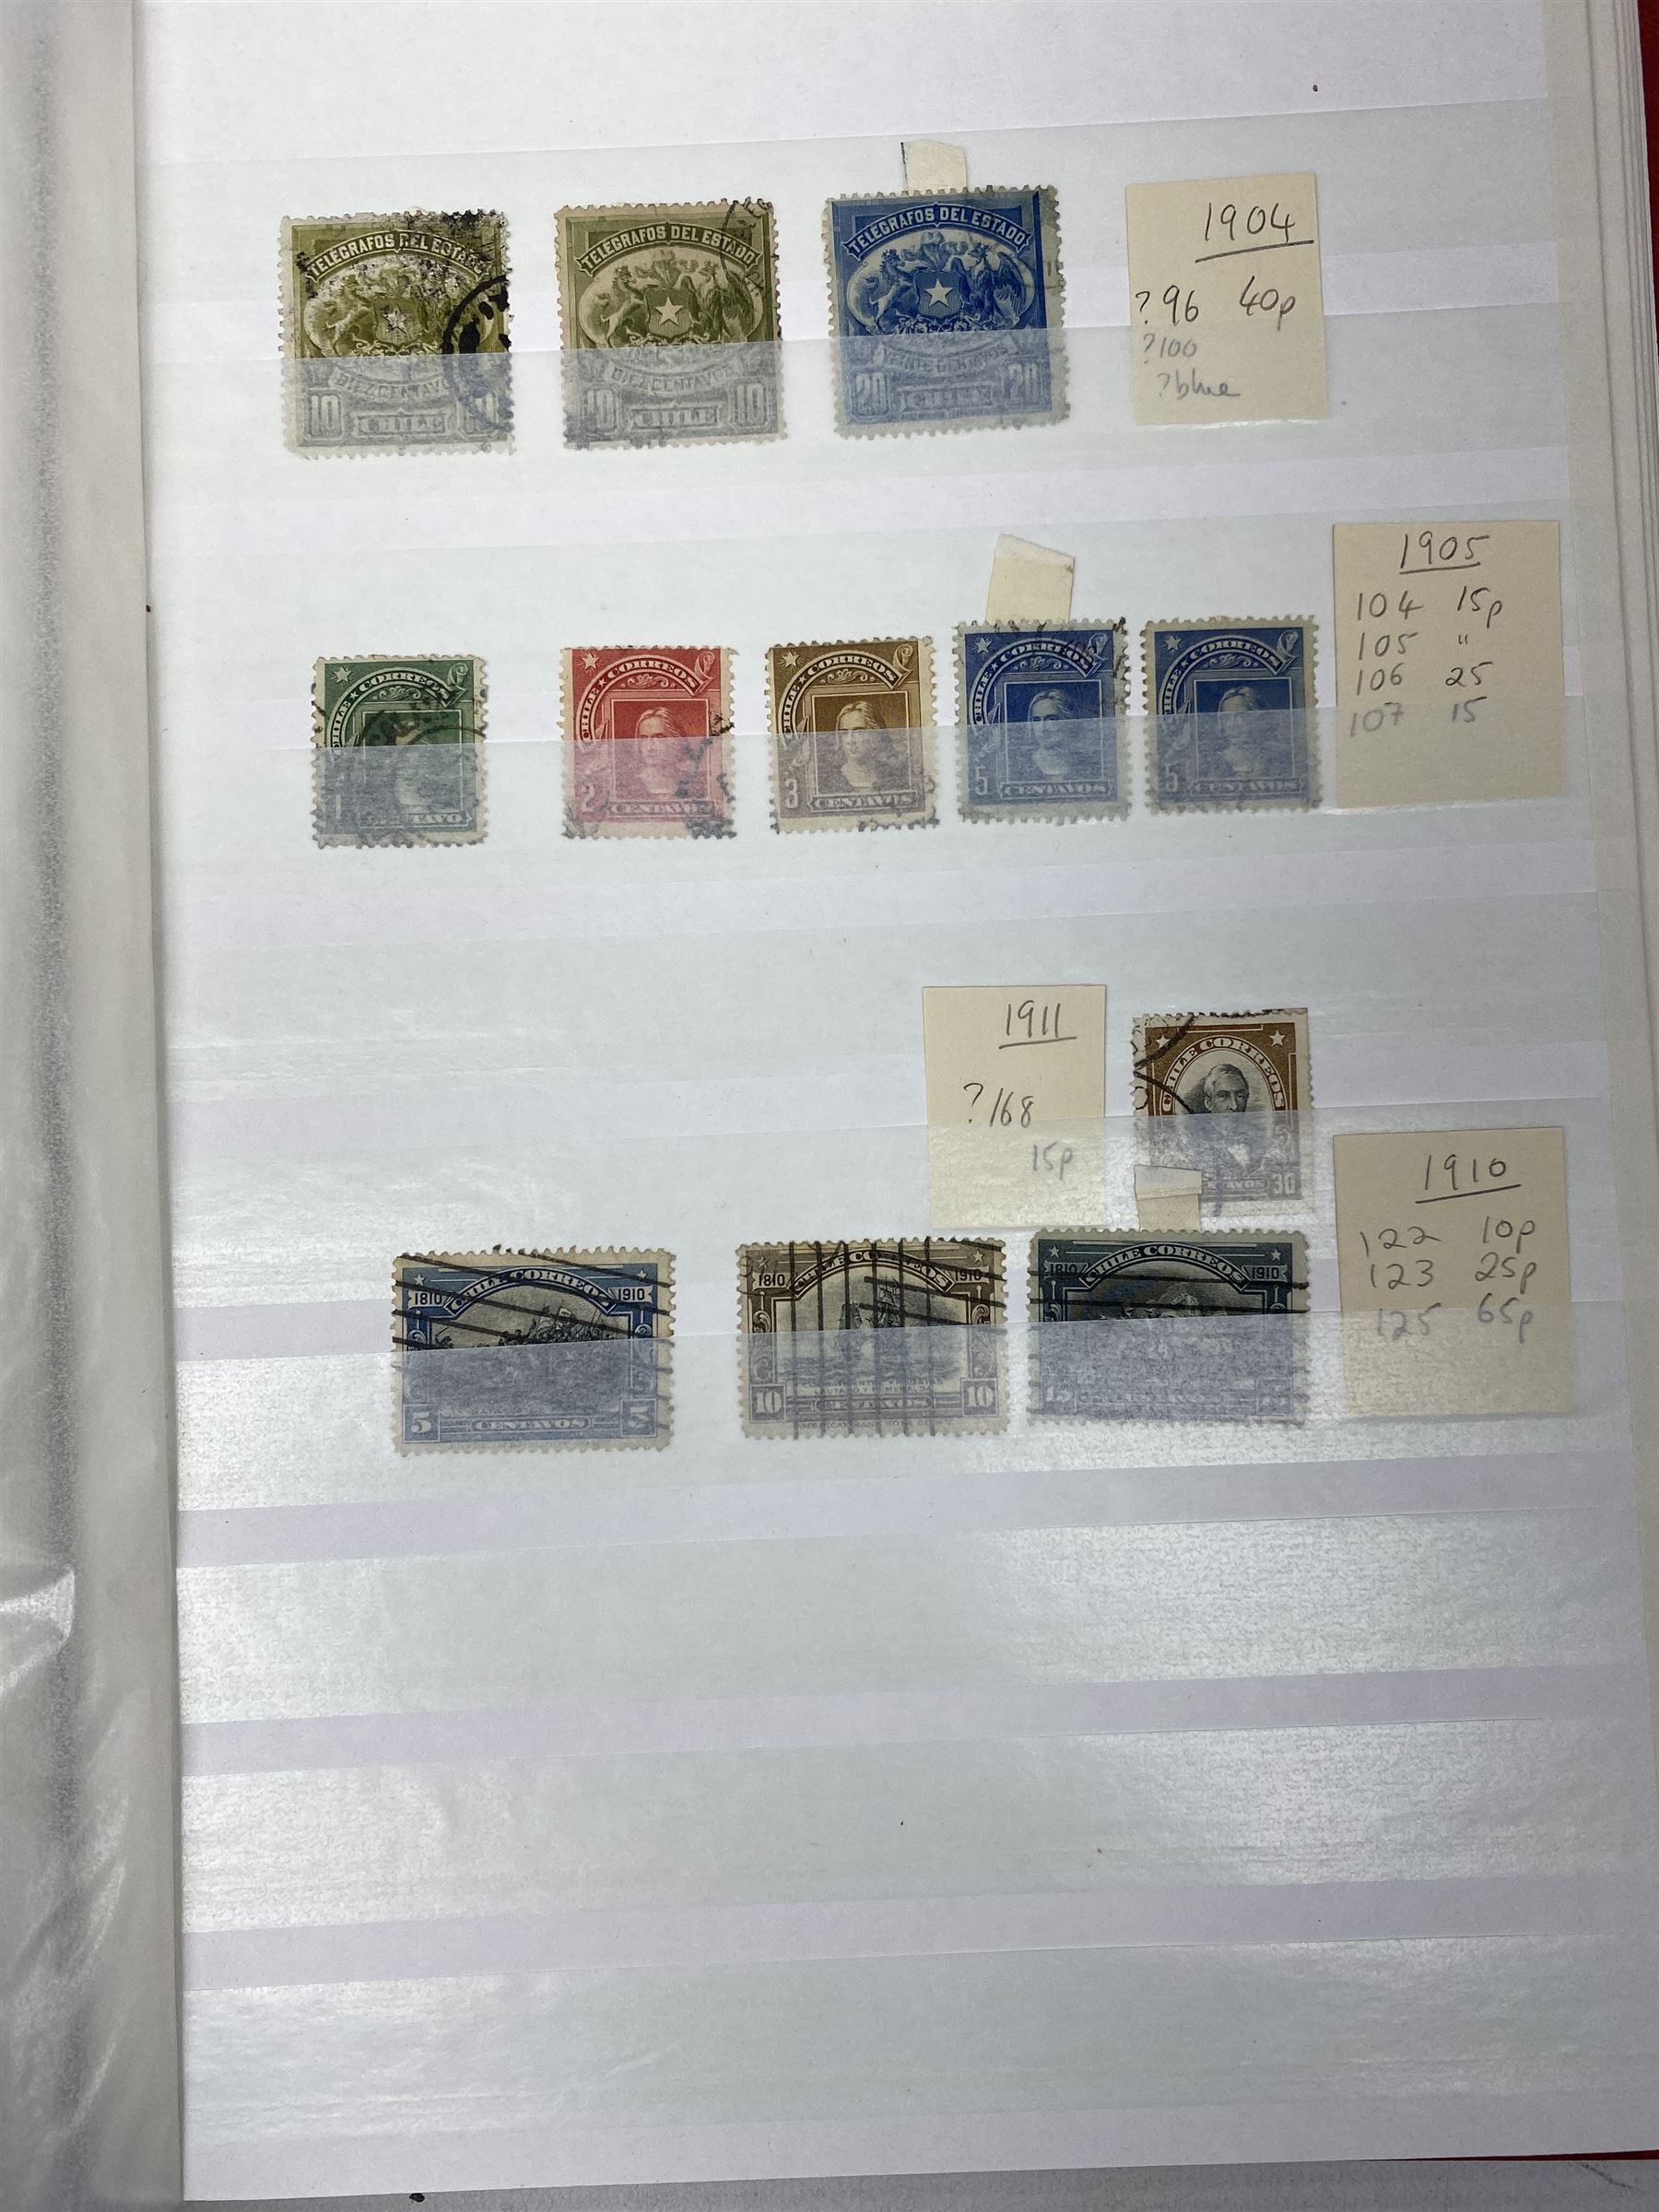 World stamps - Image 10 of 15